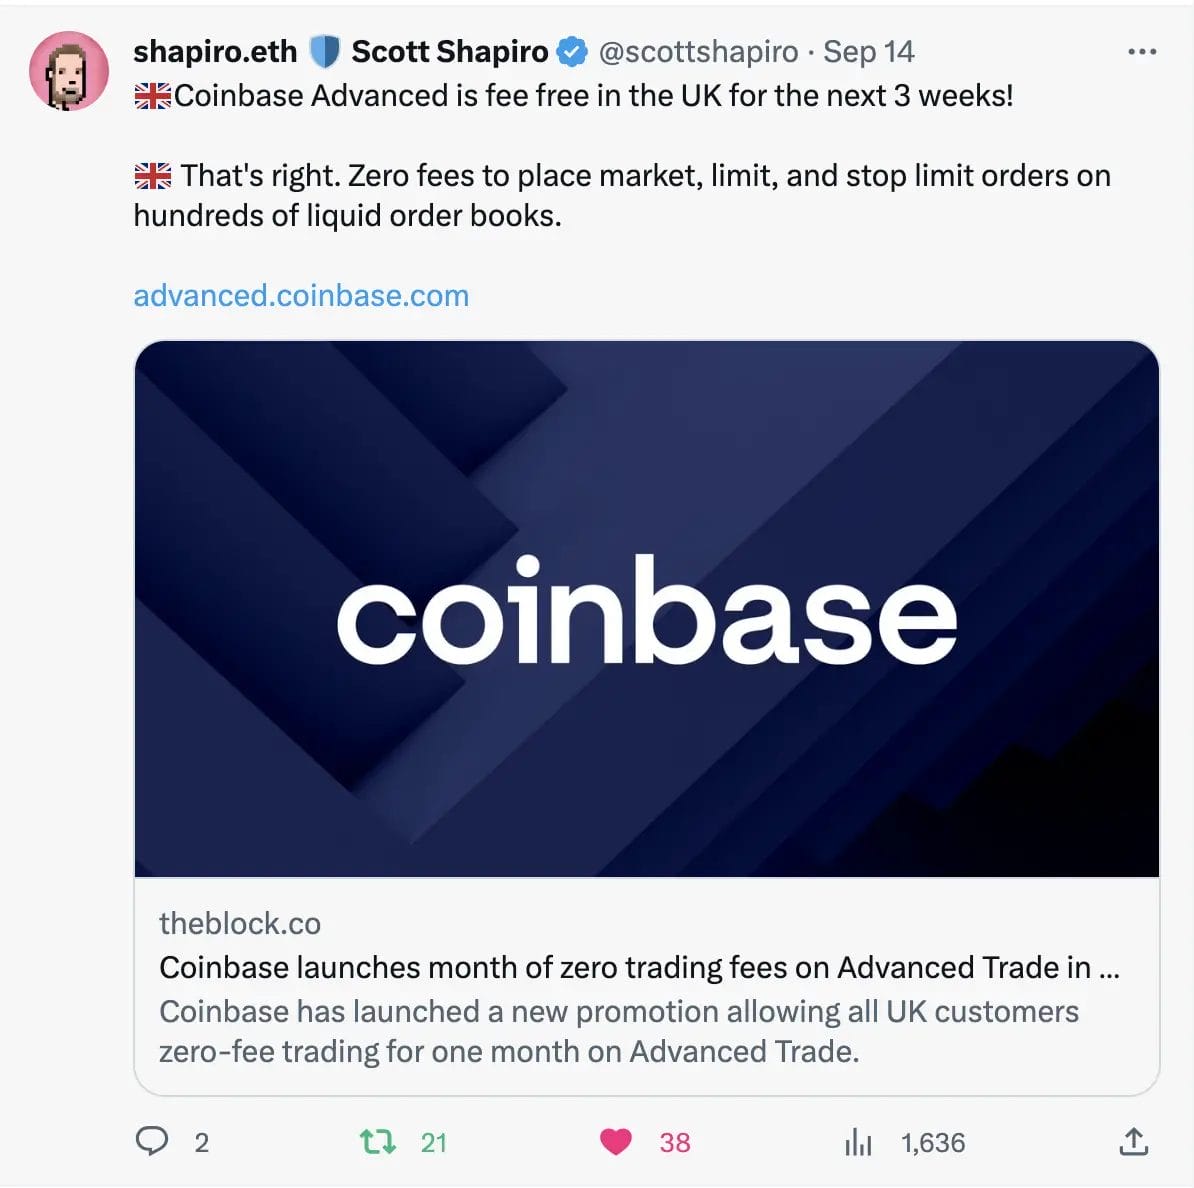 Coinbase Advanced Trade Offer Free Trading Fees in the UK